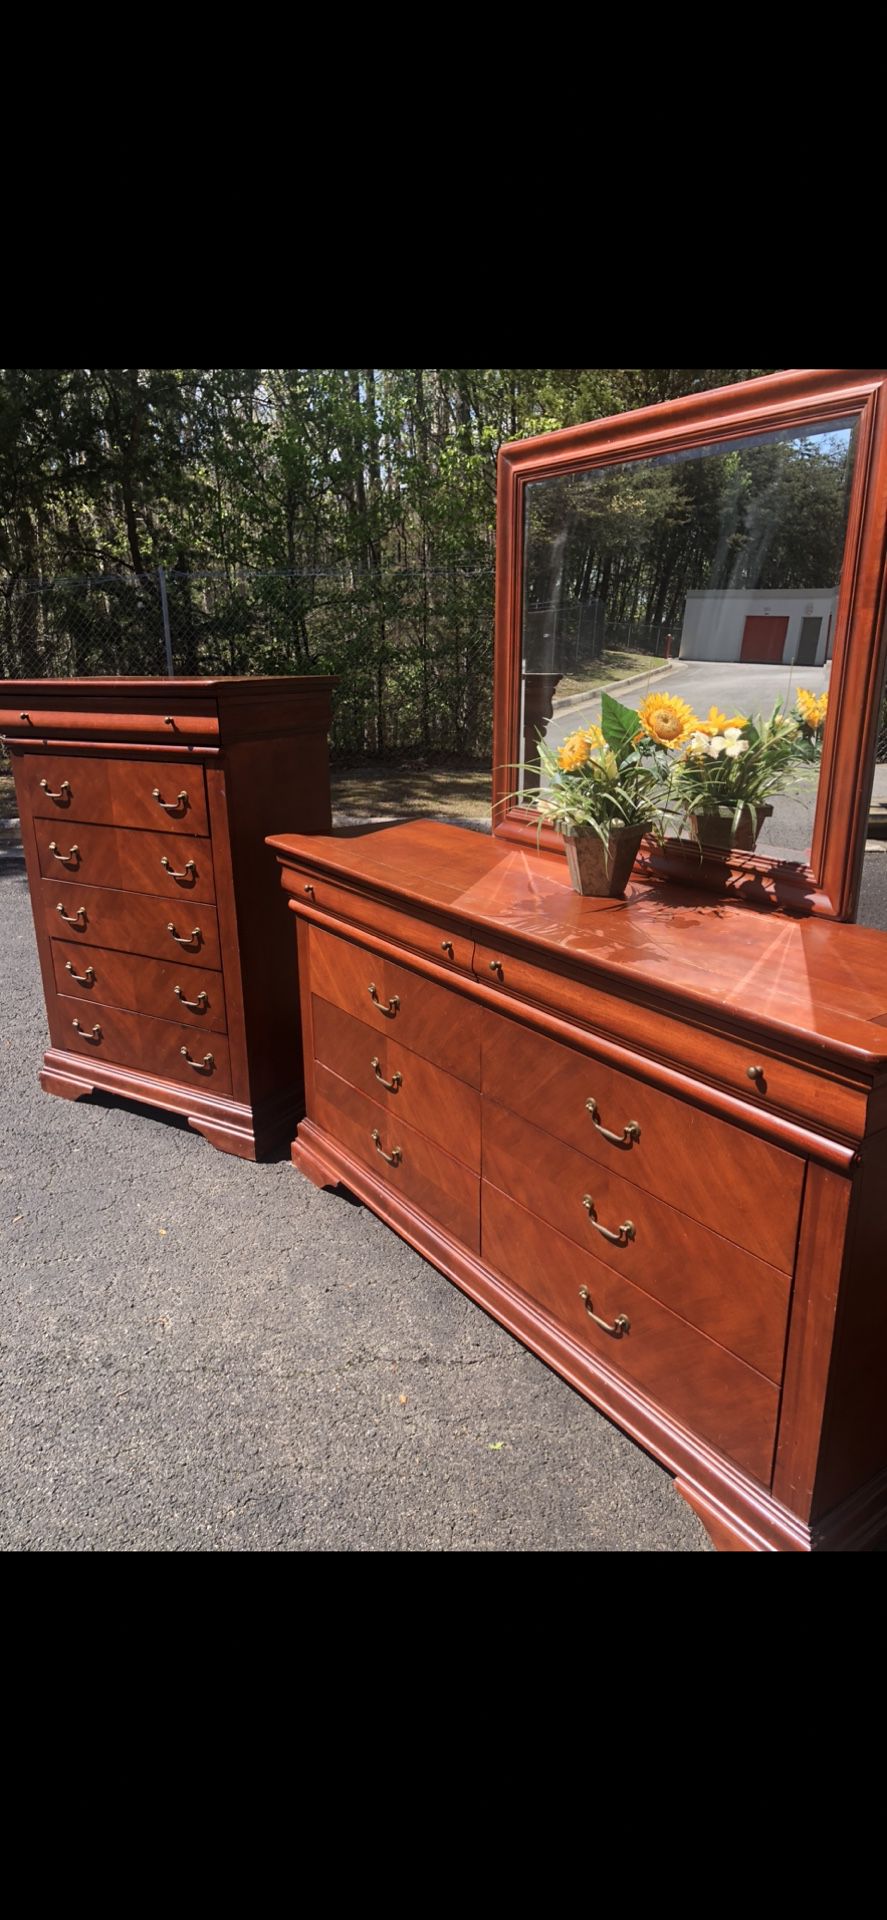 Quality Solid Wood Set Long Dresser, Big Drawers, Big Mirror, Tall Chest . Drawers Sliding Smoothly Great Conditipn